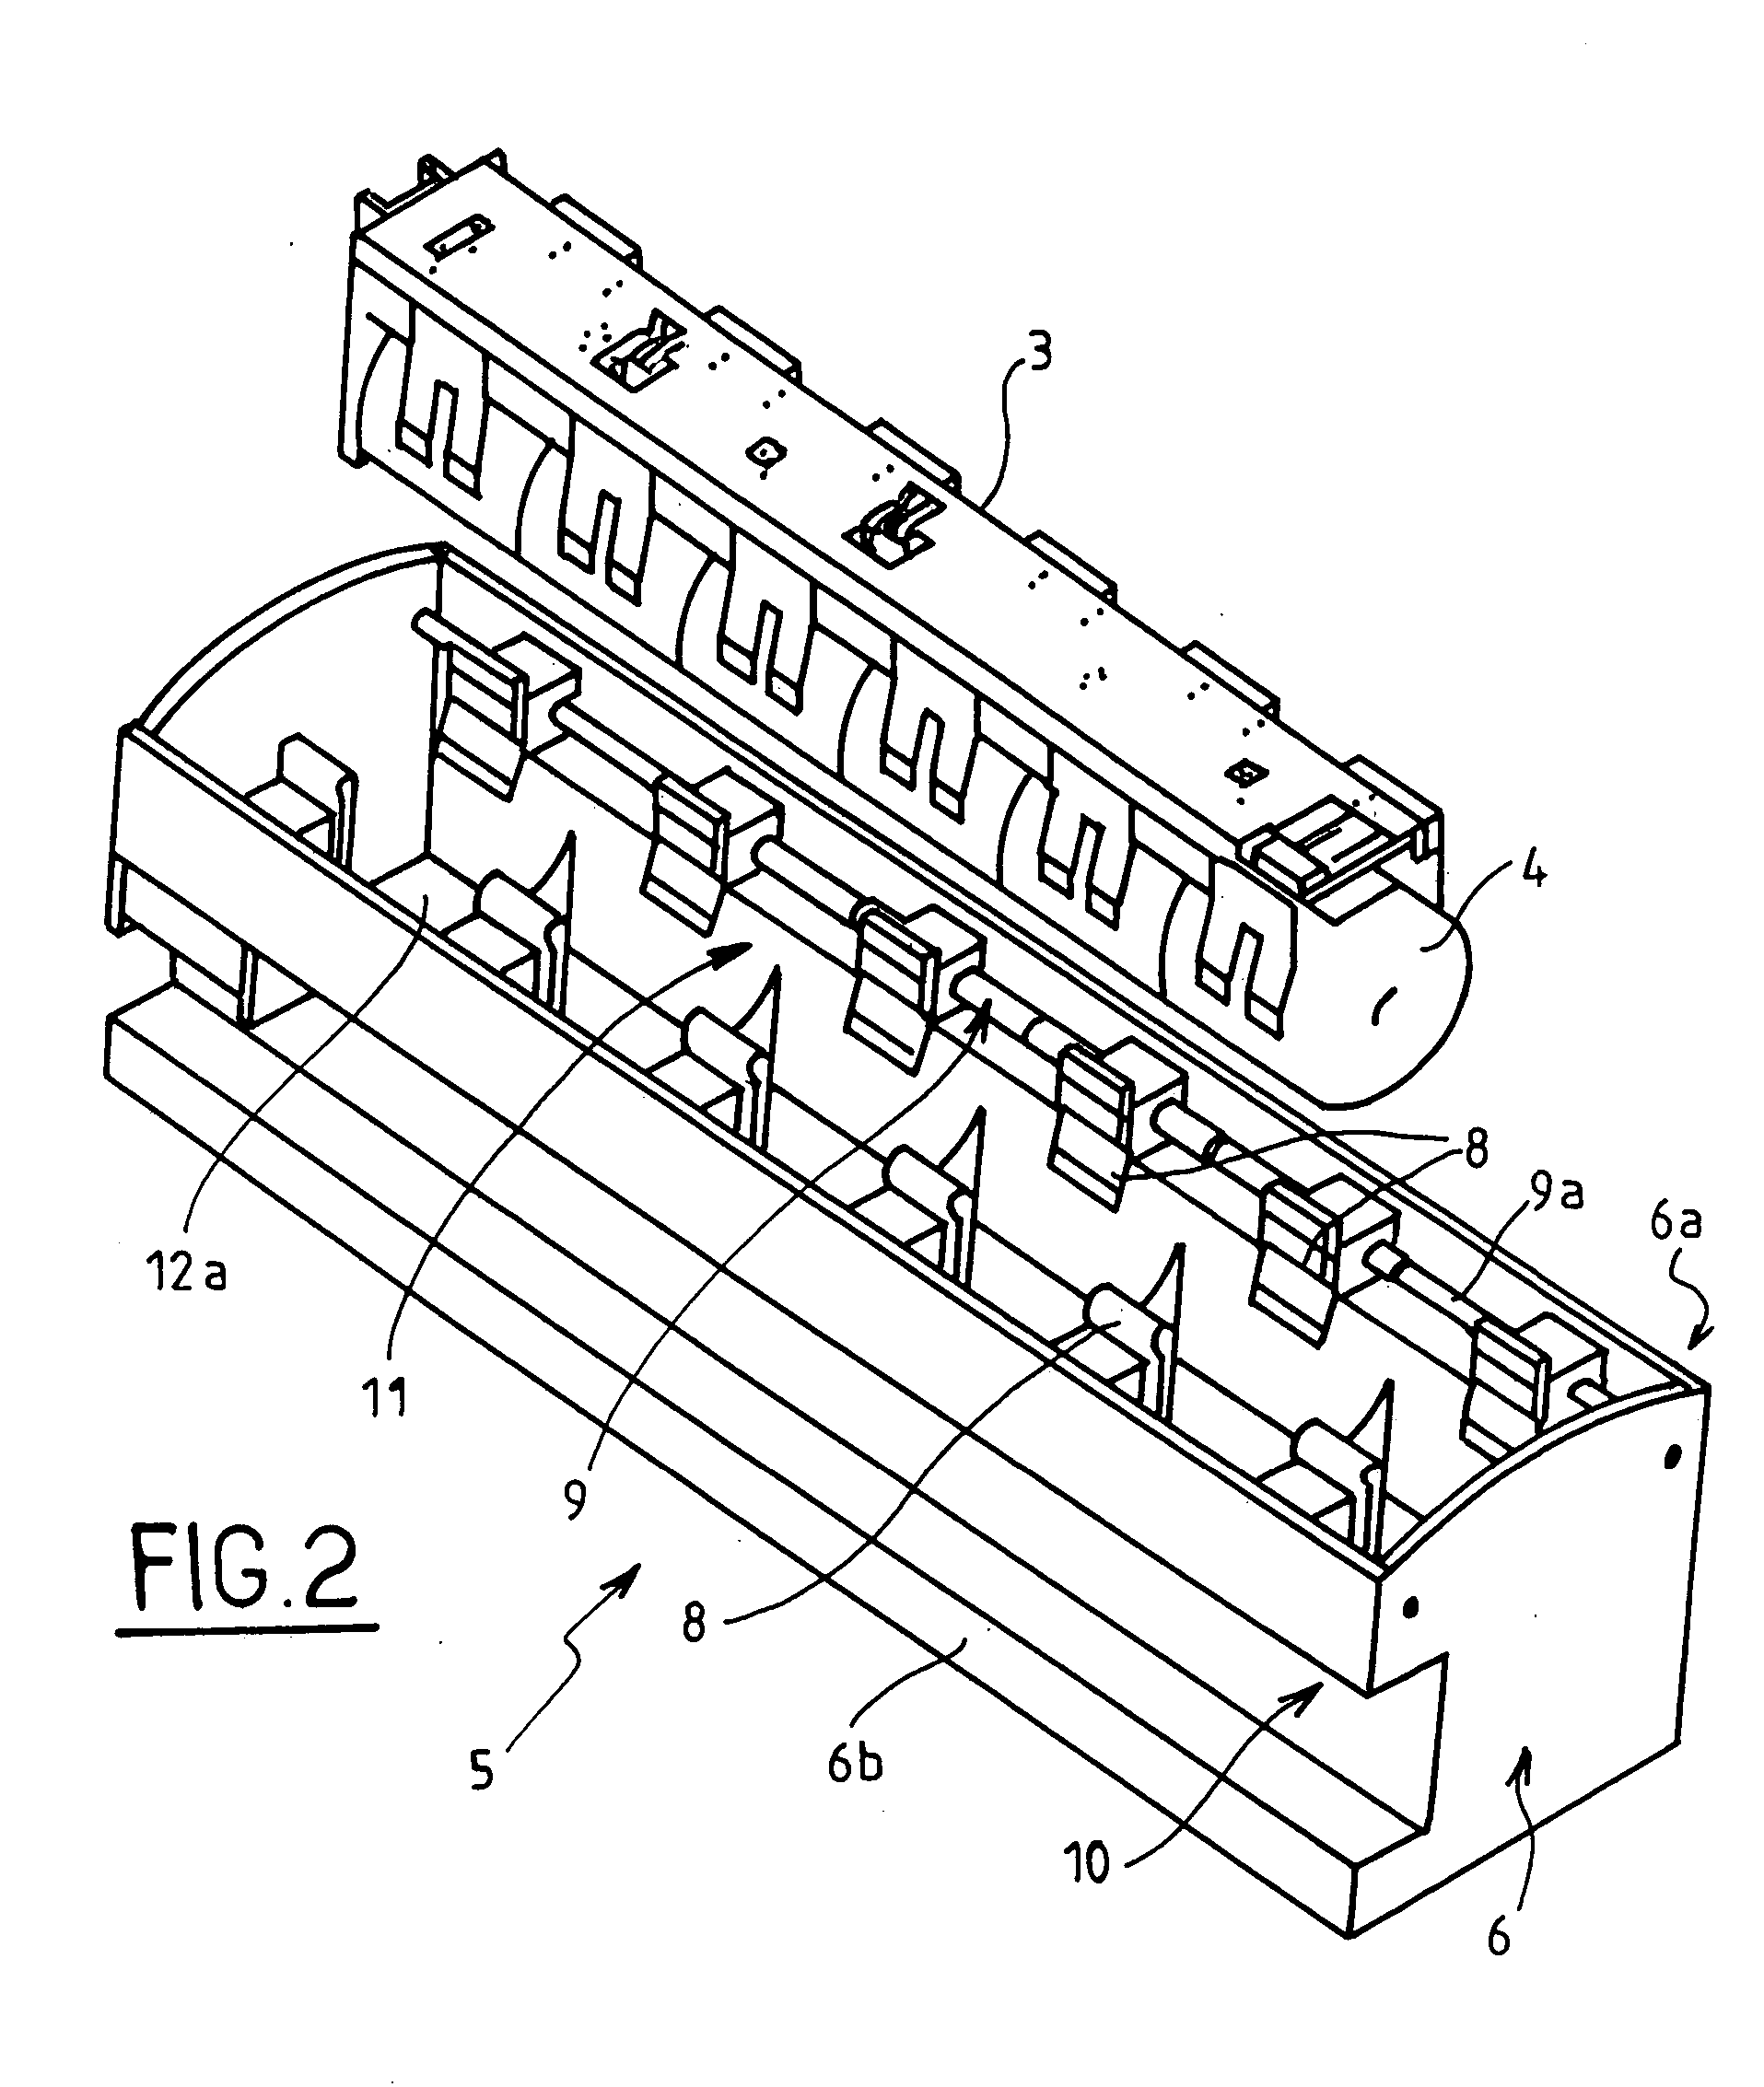 Device to separate propellant charge modules